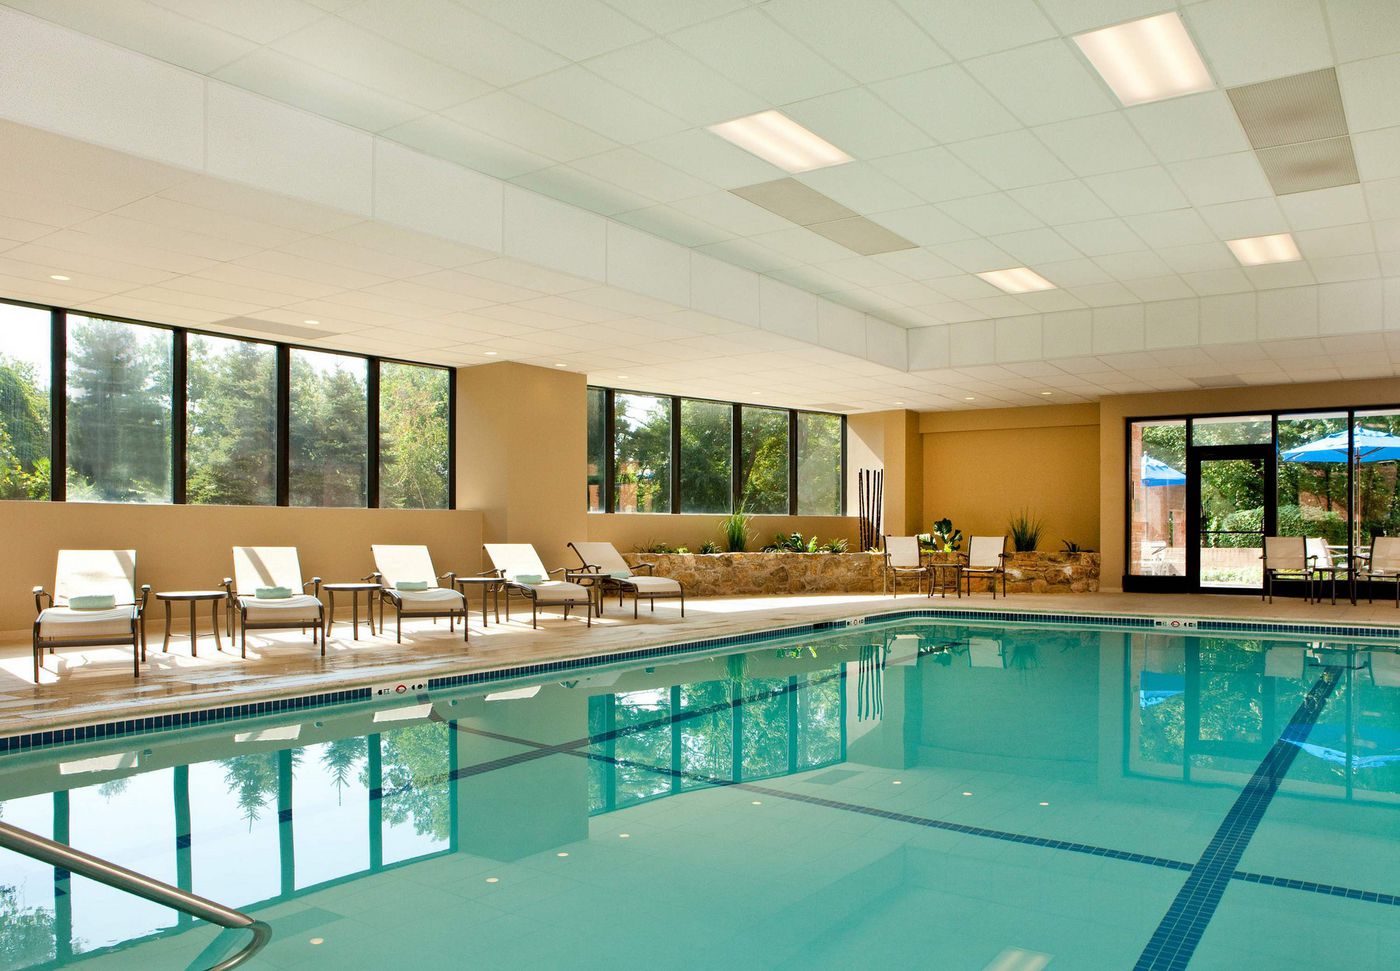 Indoor Swimming Pools 101: Cost, Construction, Advantages, & More!